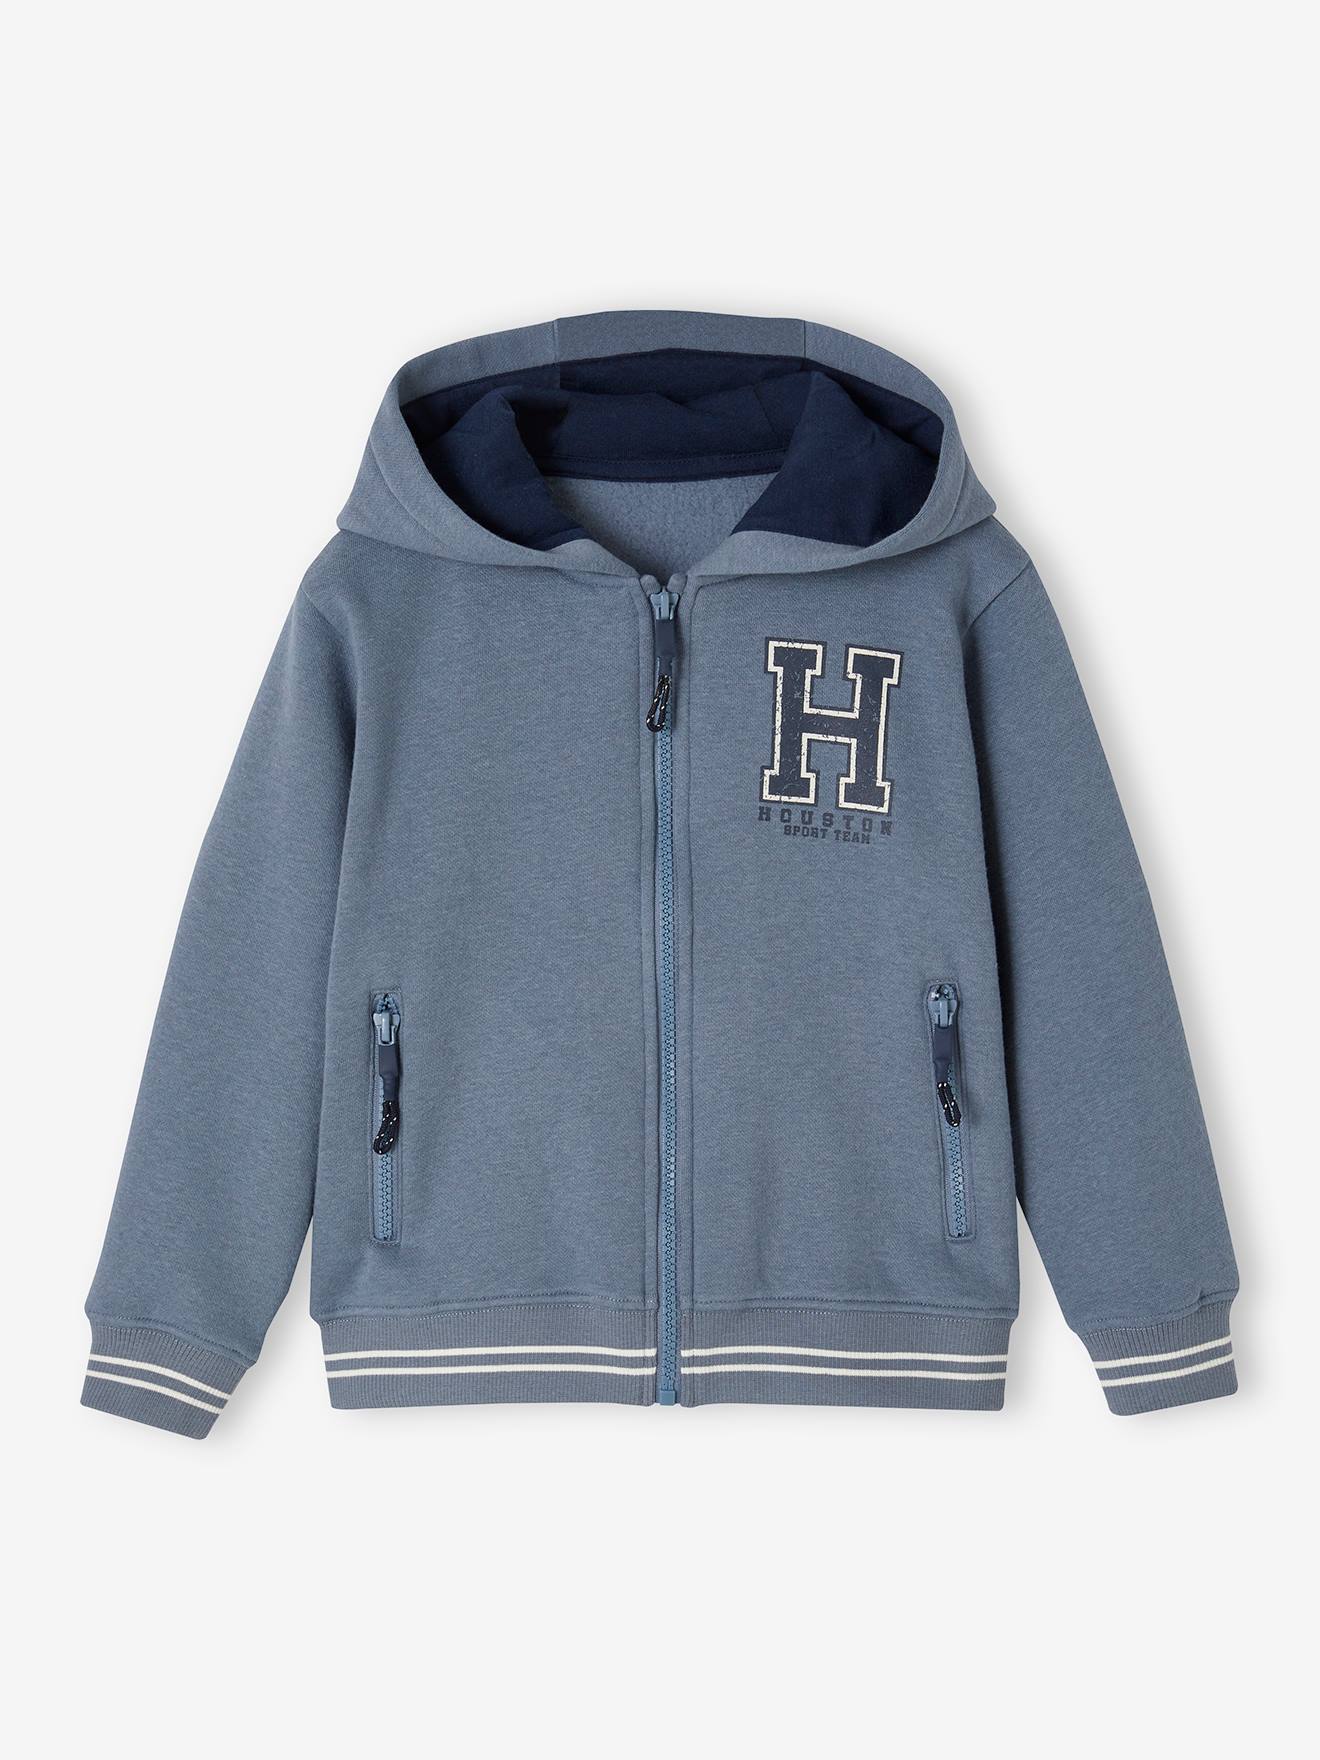 Zipped Sports Jacket with Hood for Boys grey blue